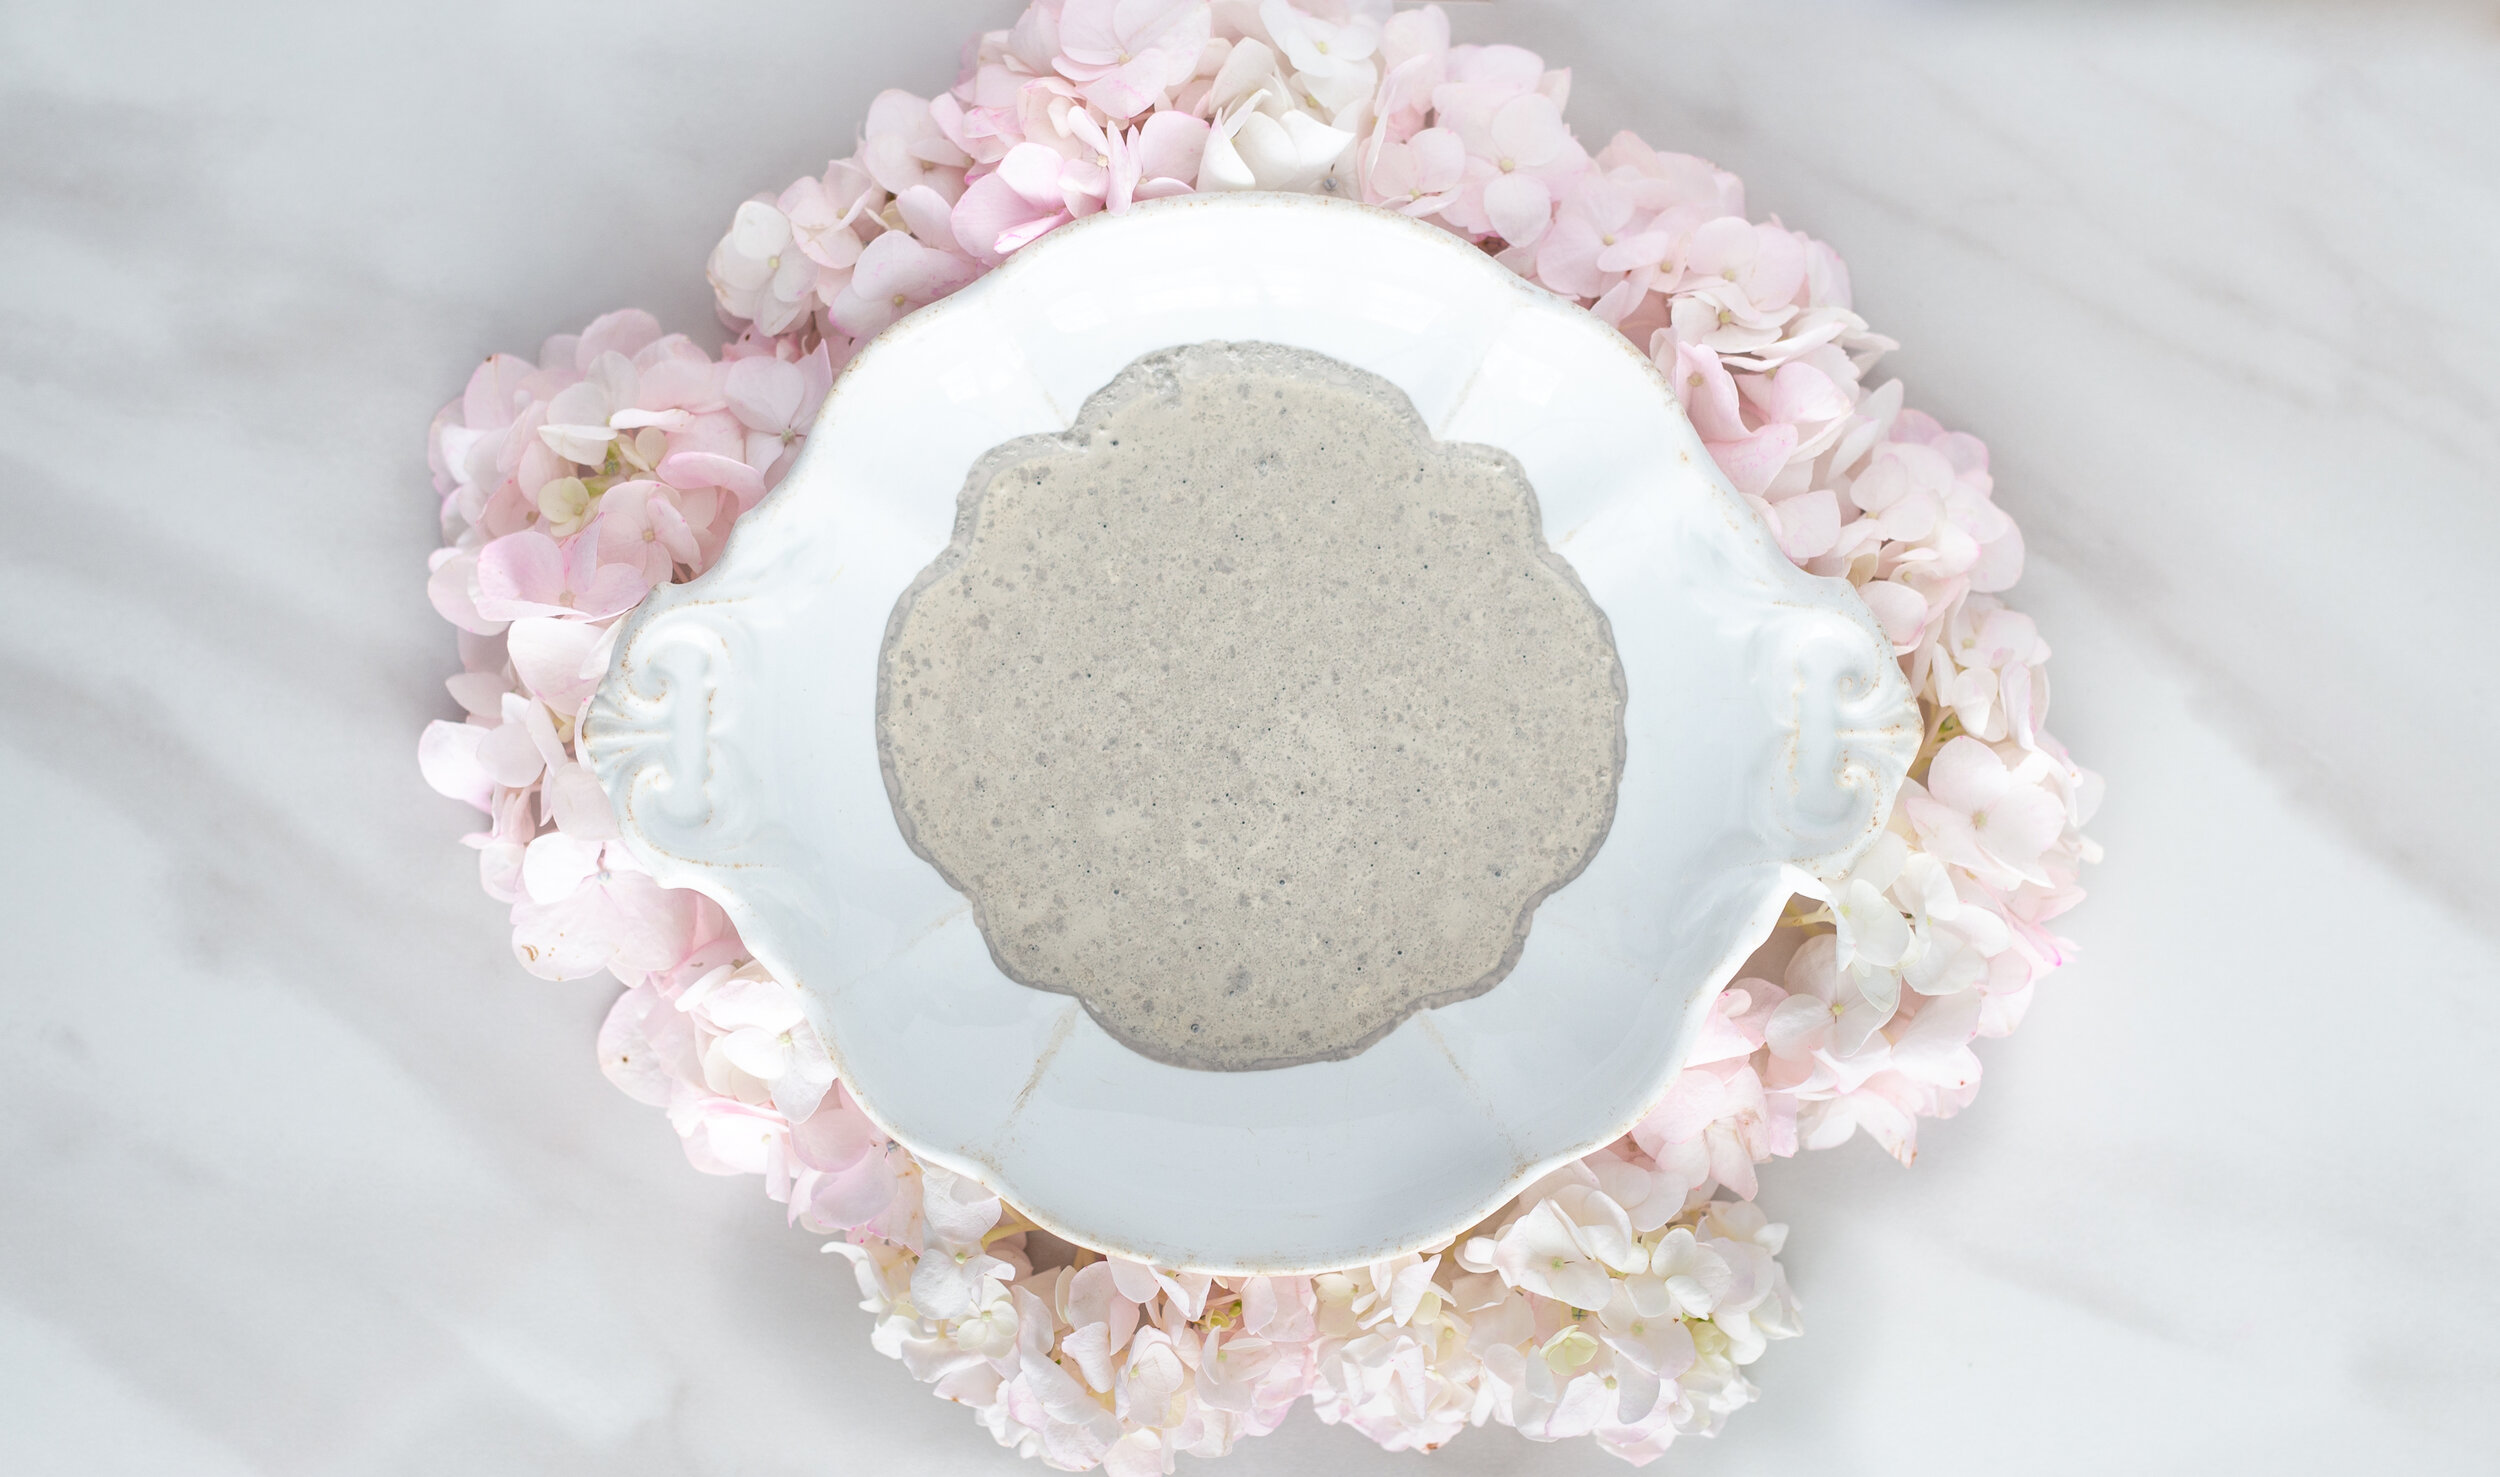 Schloss by Miss Mustard Seed’s® Milk Paint in ironstone bowl surrounded with hydrangeas